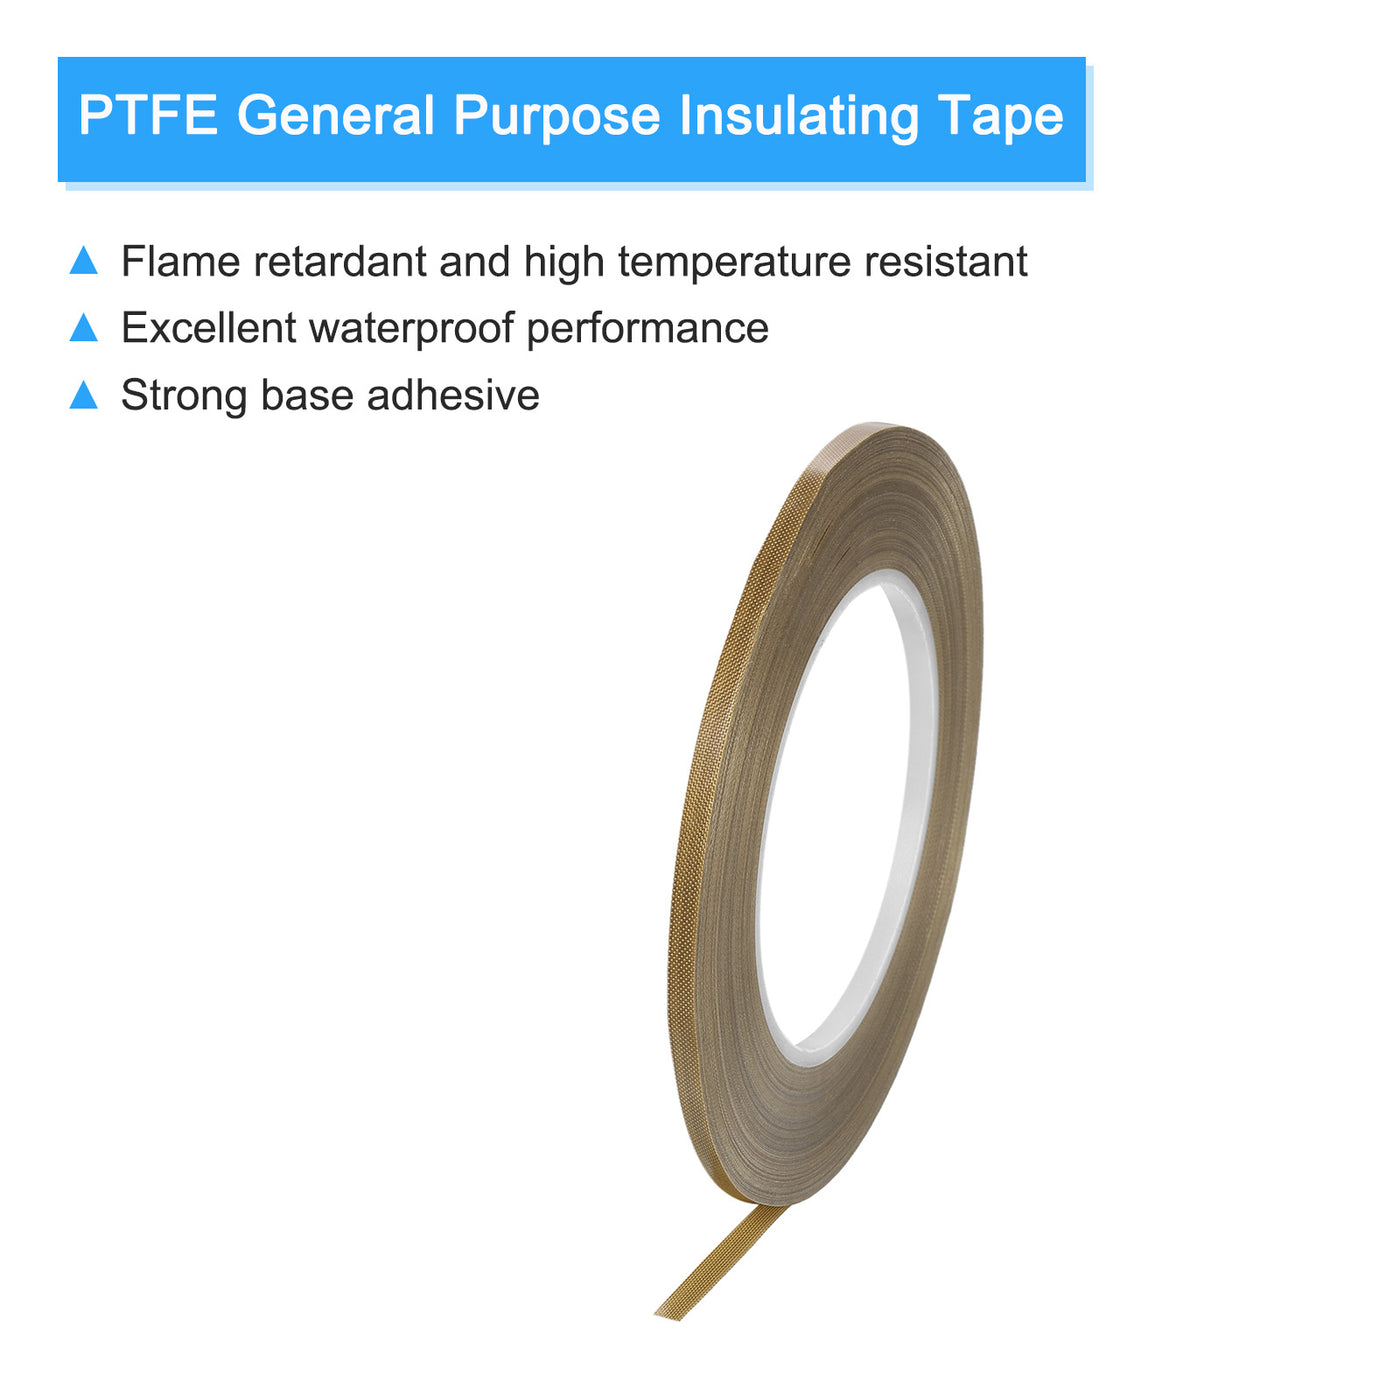 Harfington High Temperature Tape 3mm PTFE Coated Fabric Tape Heat Resistant Tape for Vacuum Sealers Adhesive Tape 50m/164ft Brown 0.13mm Thickness